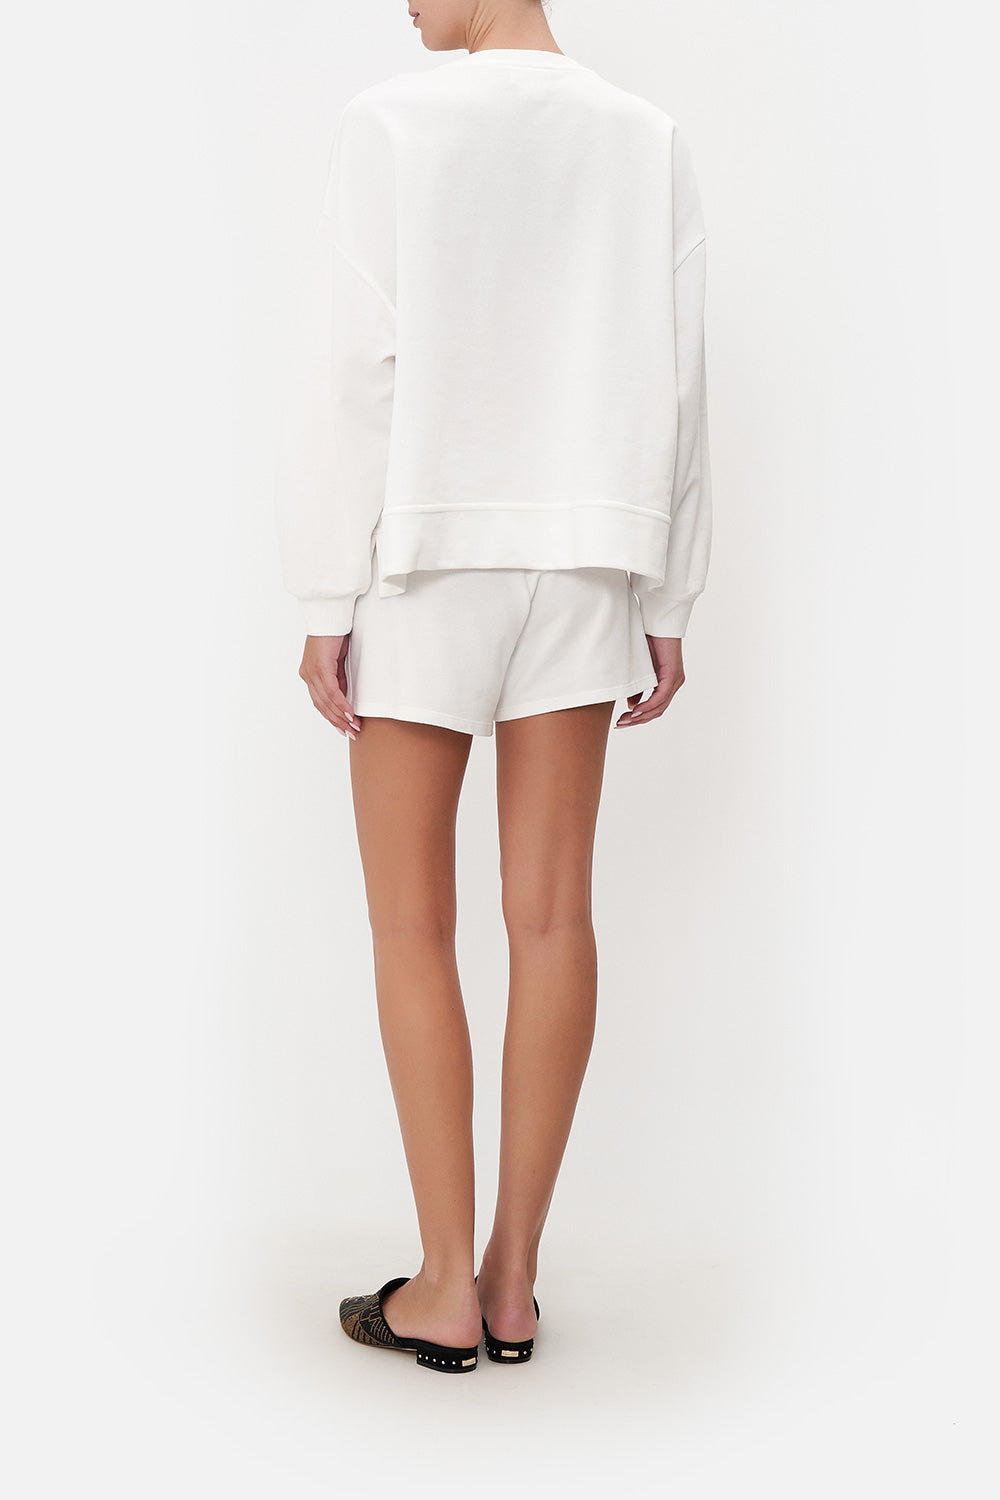 SHORT RELAXED SWEATER LOGO CAPSULE - SOLID WHITE